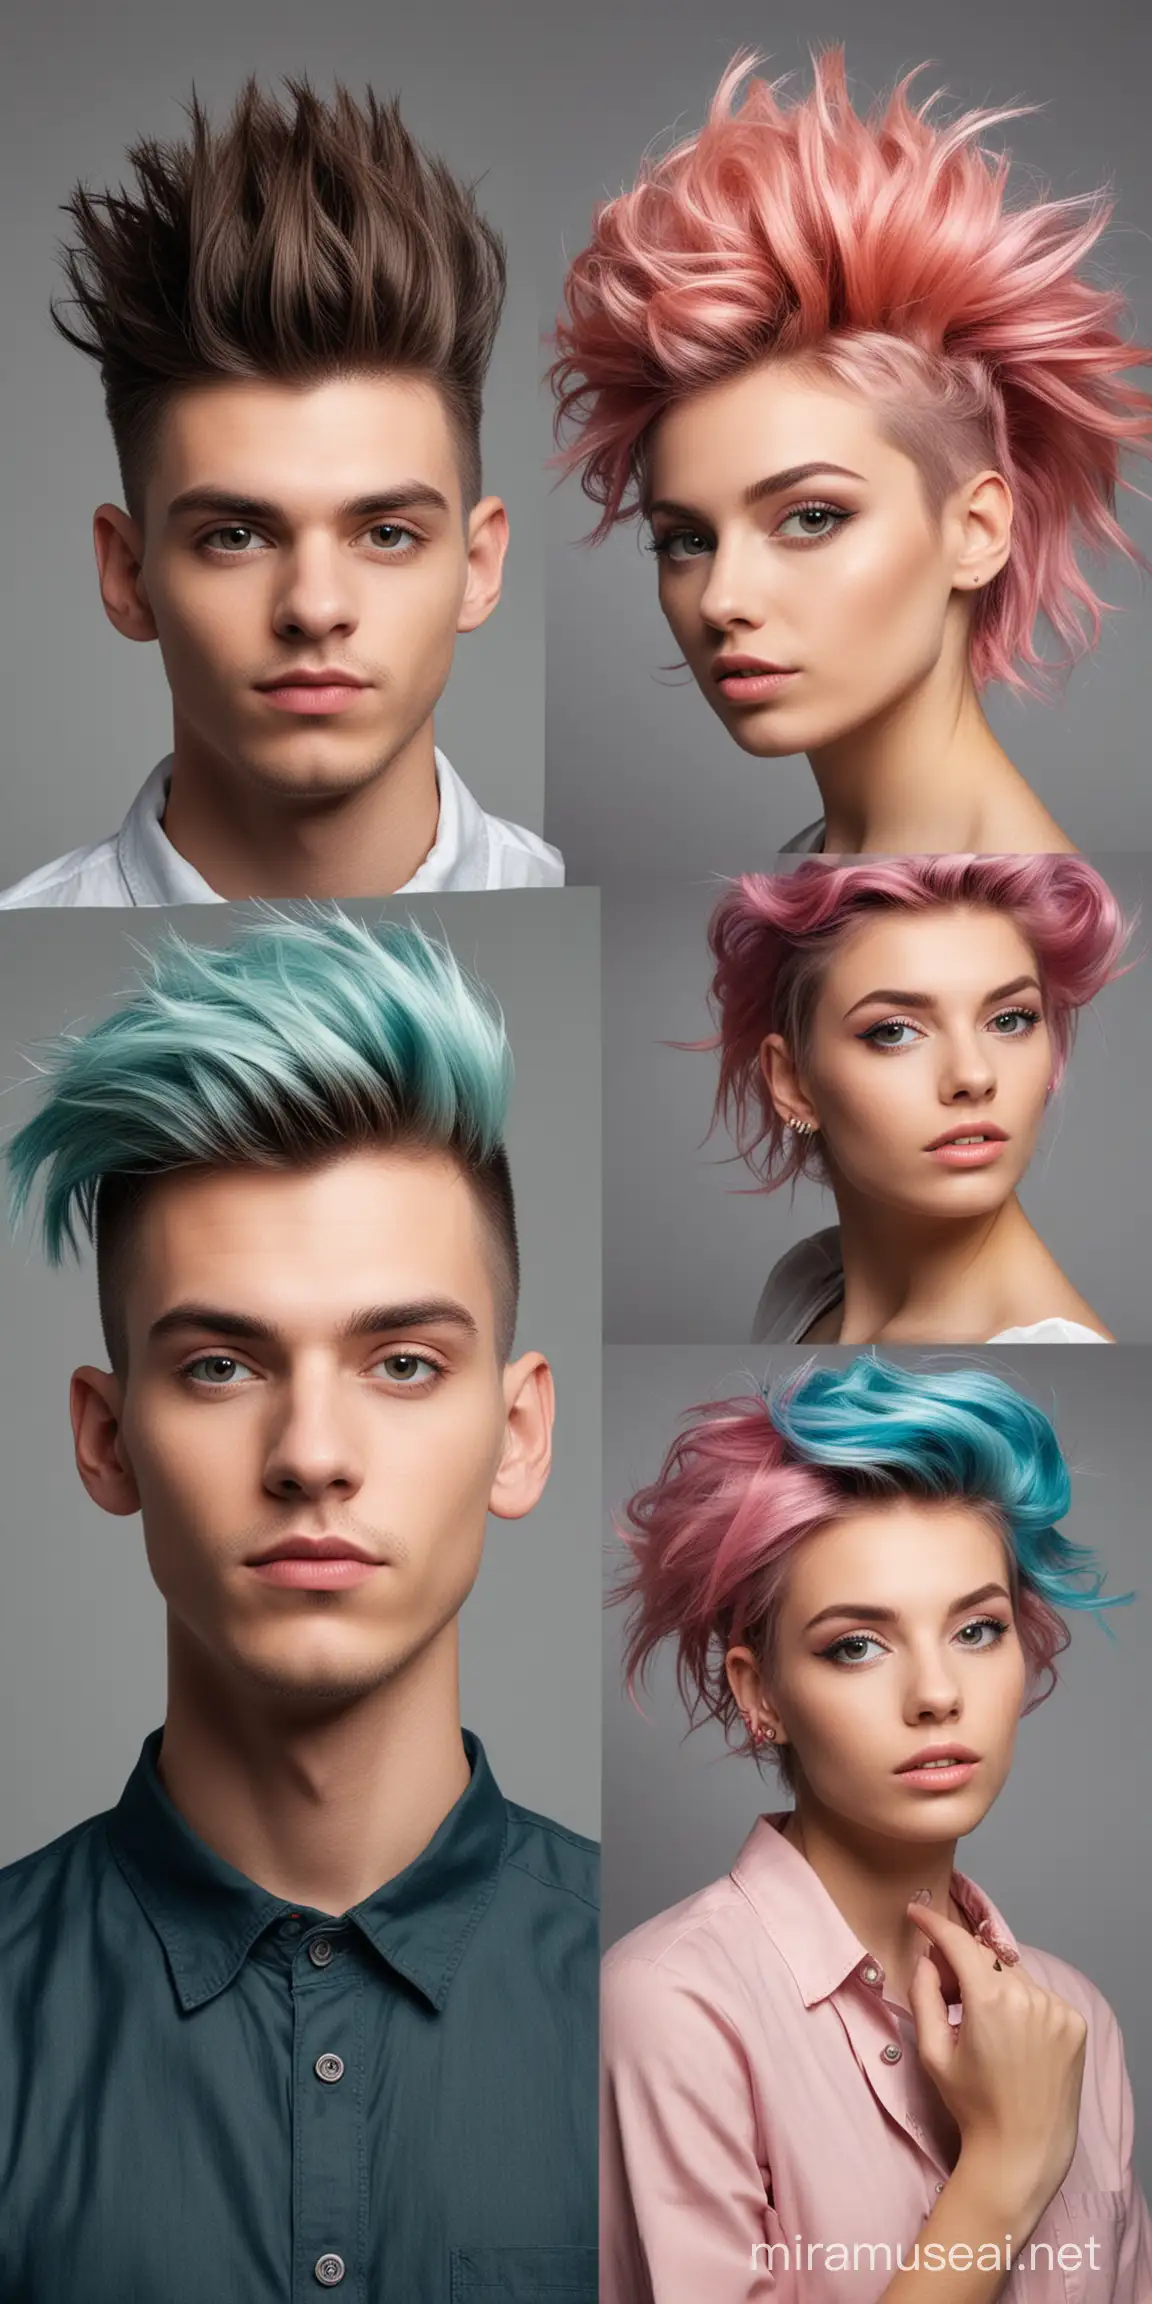 Create an image of a young man and woman with unconventional hairstyles. Let your creativity flow with unique and eye-catching hair designs that stand out.